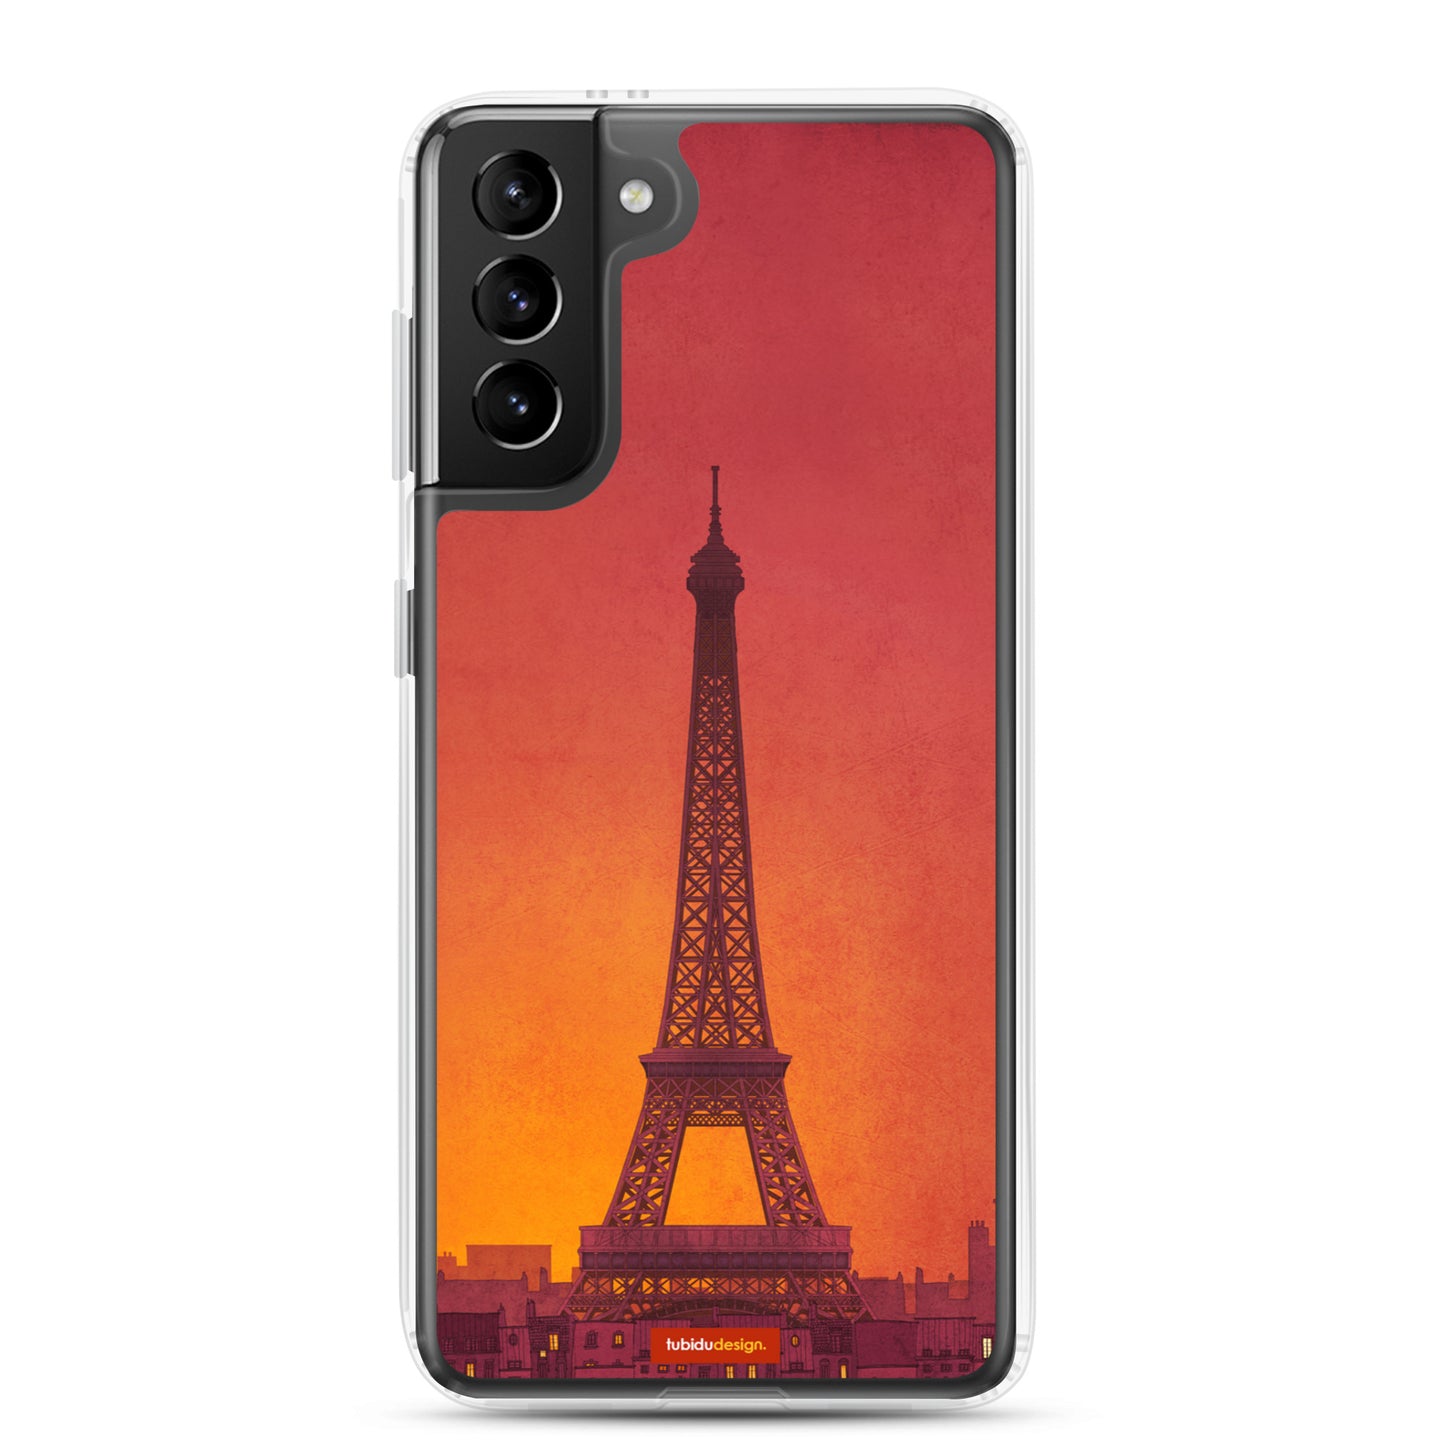 New day - Illustrated Samsung Phone Case